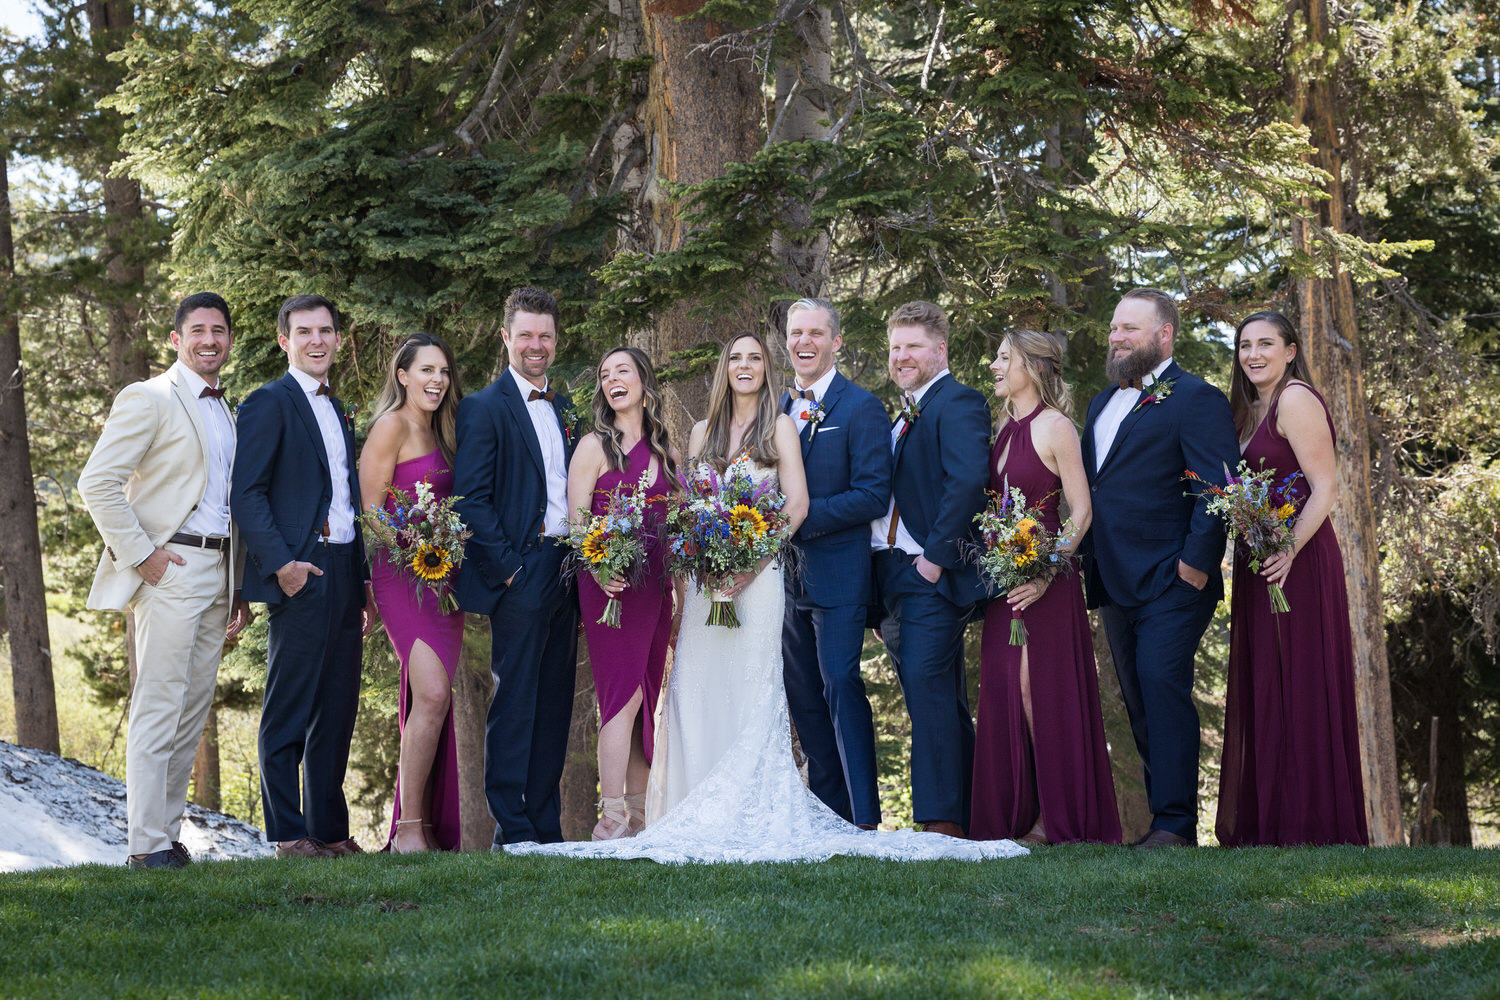 The wedding party laughs spontaneously at a Sugar Bowl Resort group portrait location.